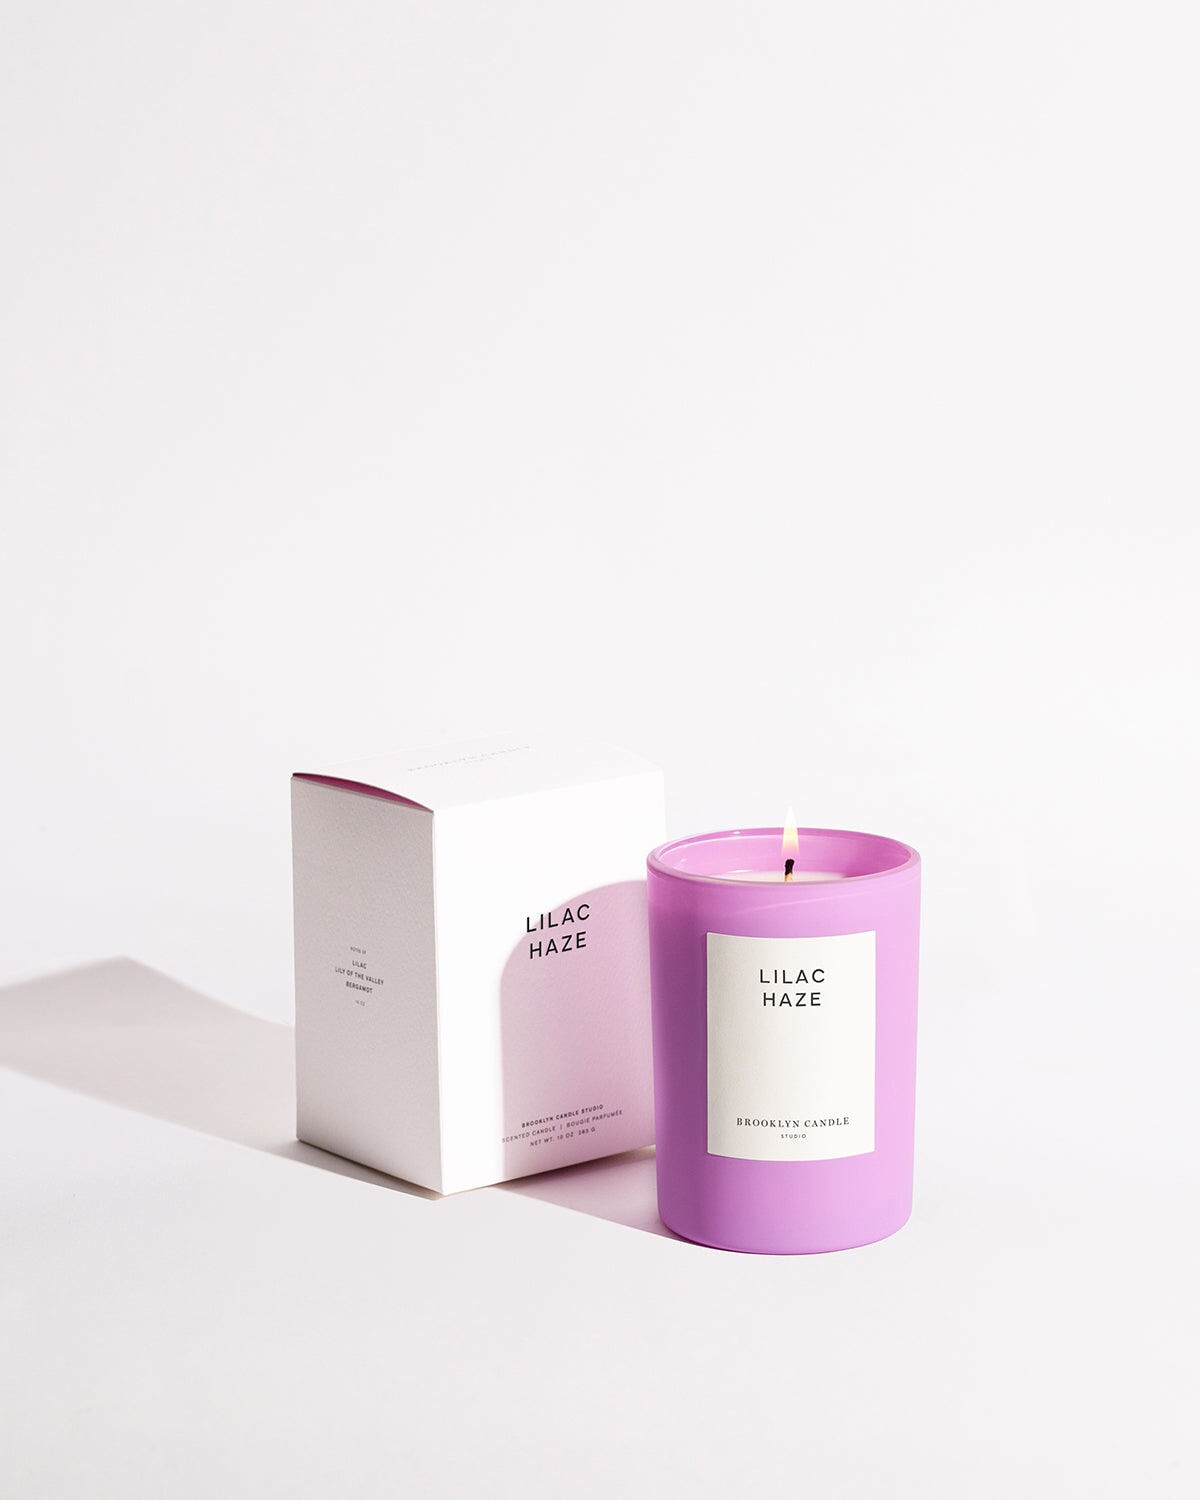 Lilac Haze Spring Edition Candle Lilac Haze Collection Brooklyn Candle Studio 